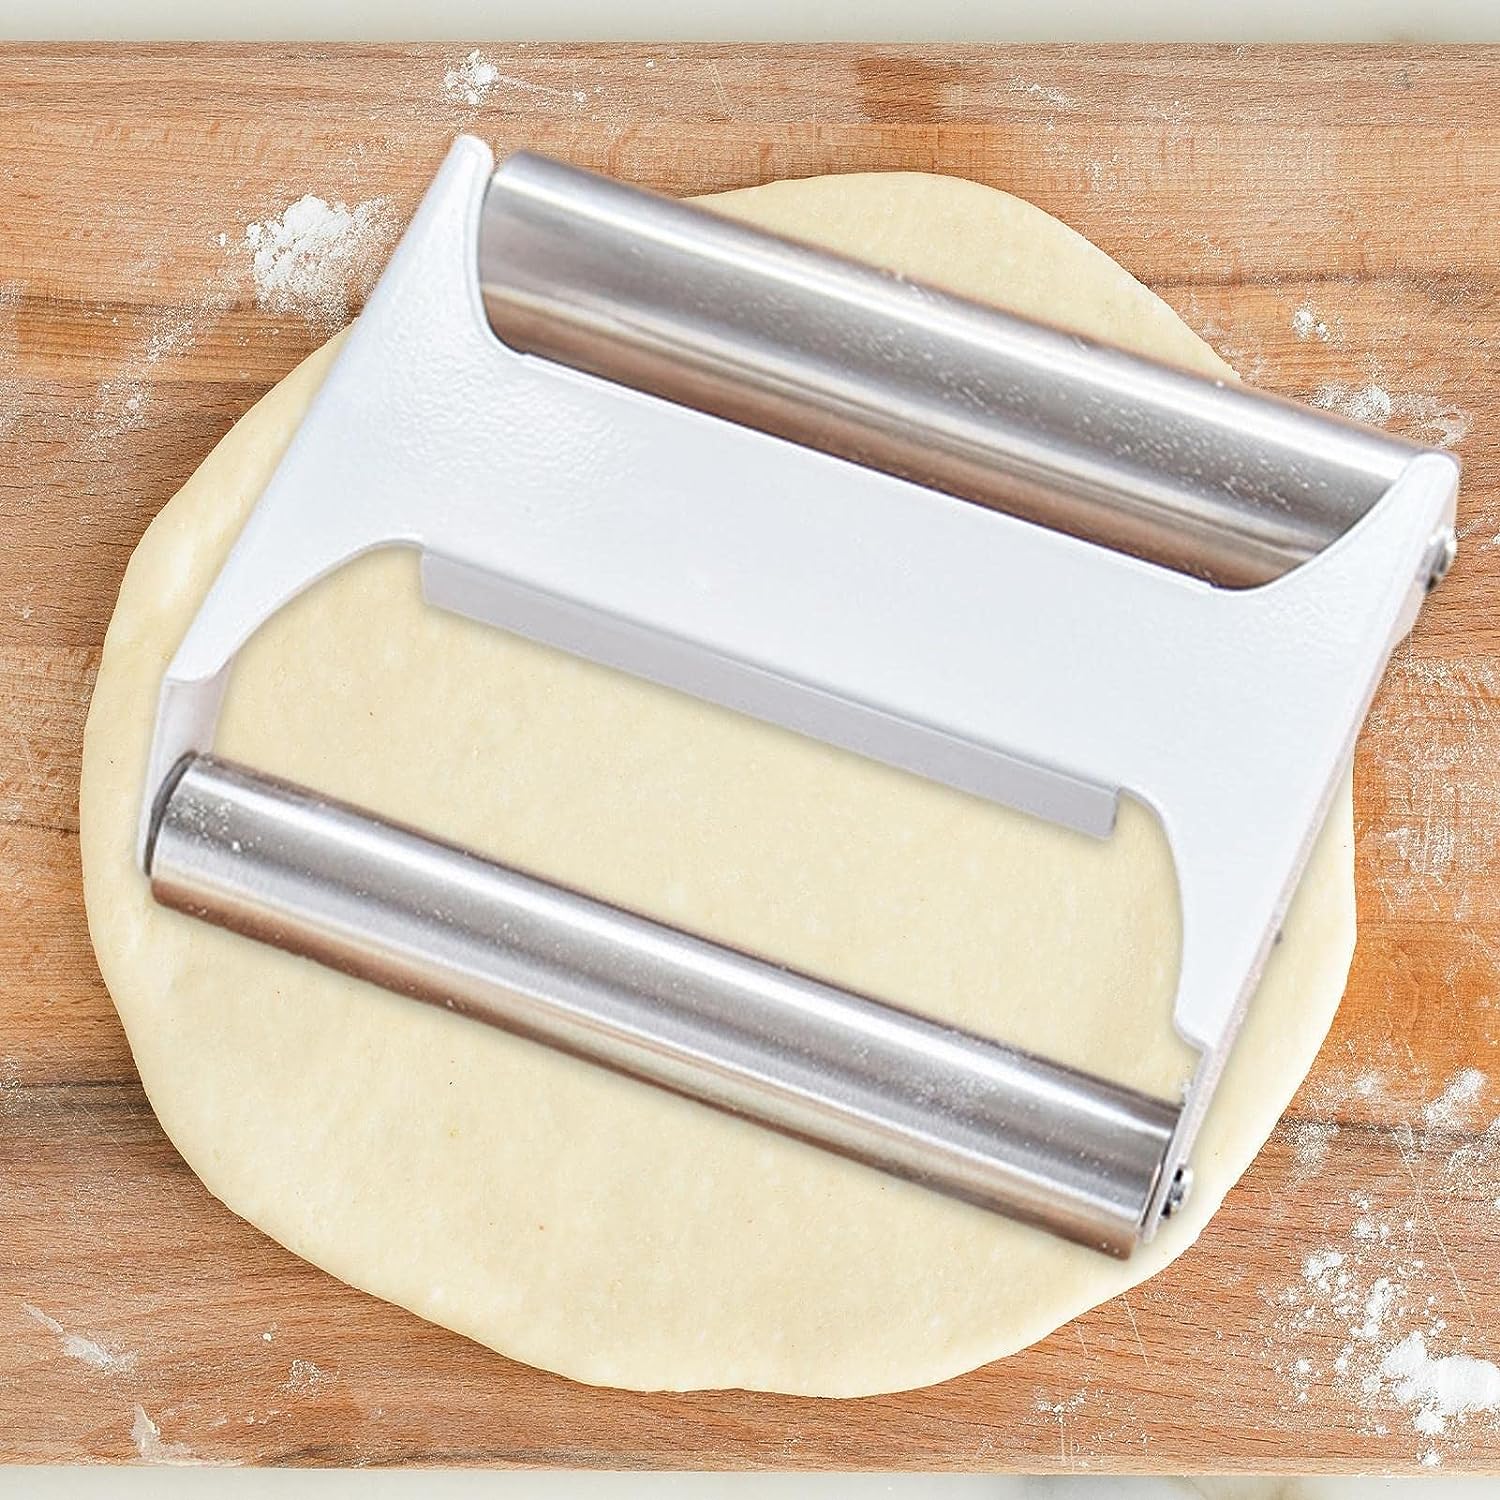 Double-Sided Stainless Steel Dough Roller with Dumplings on it